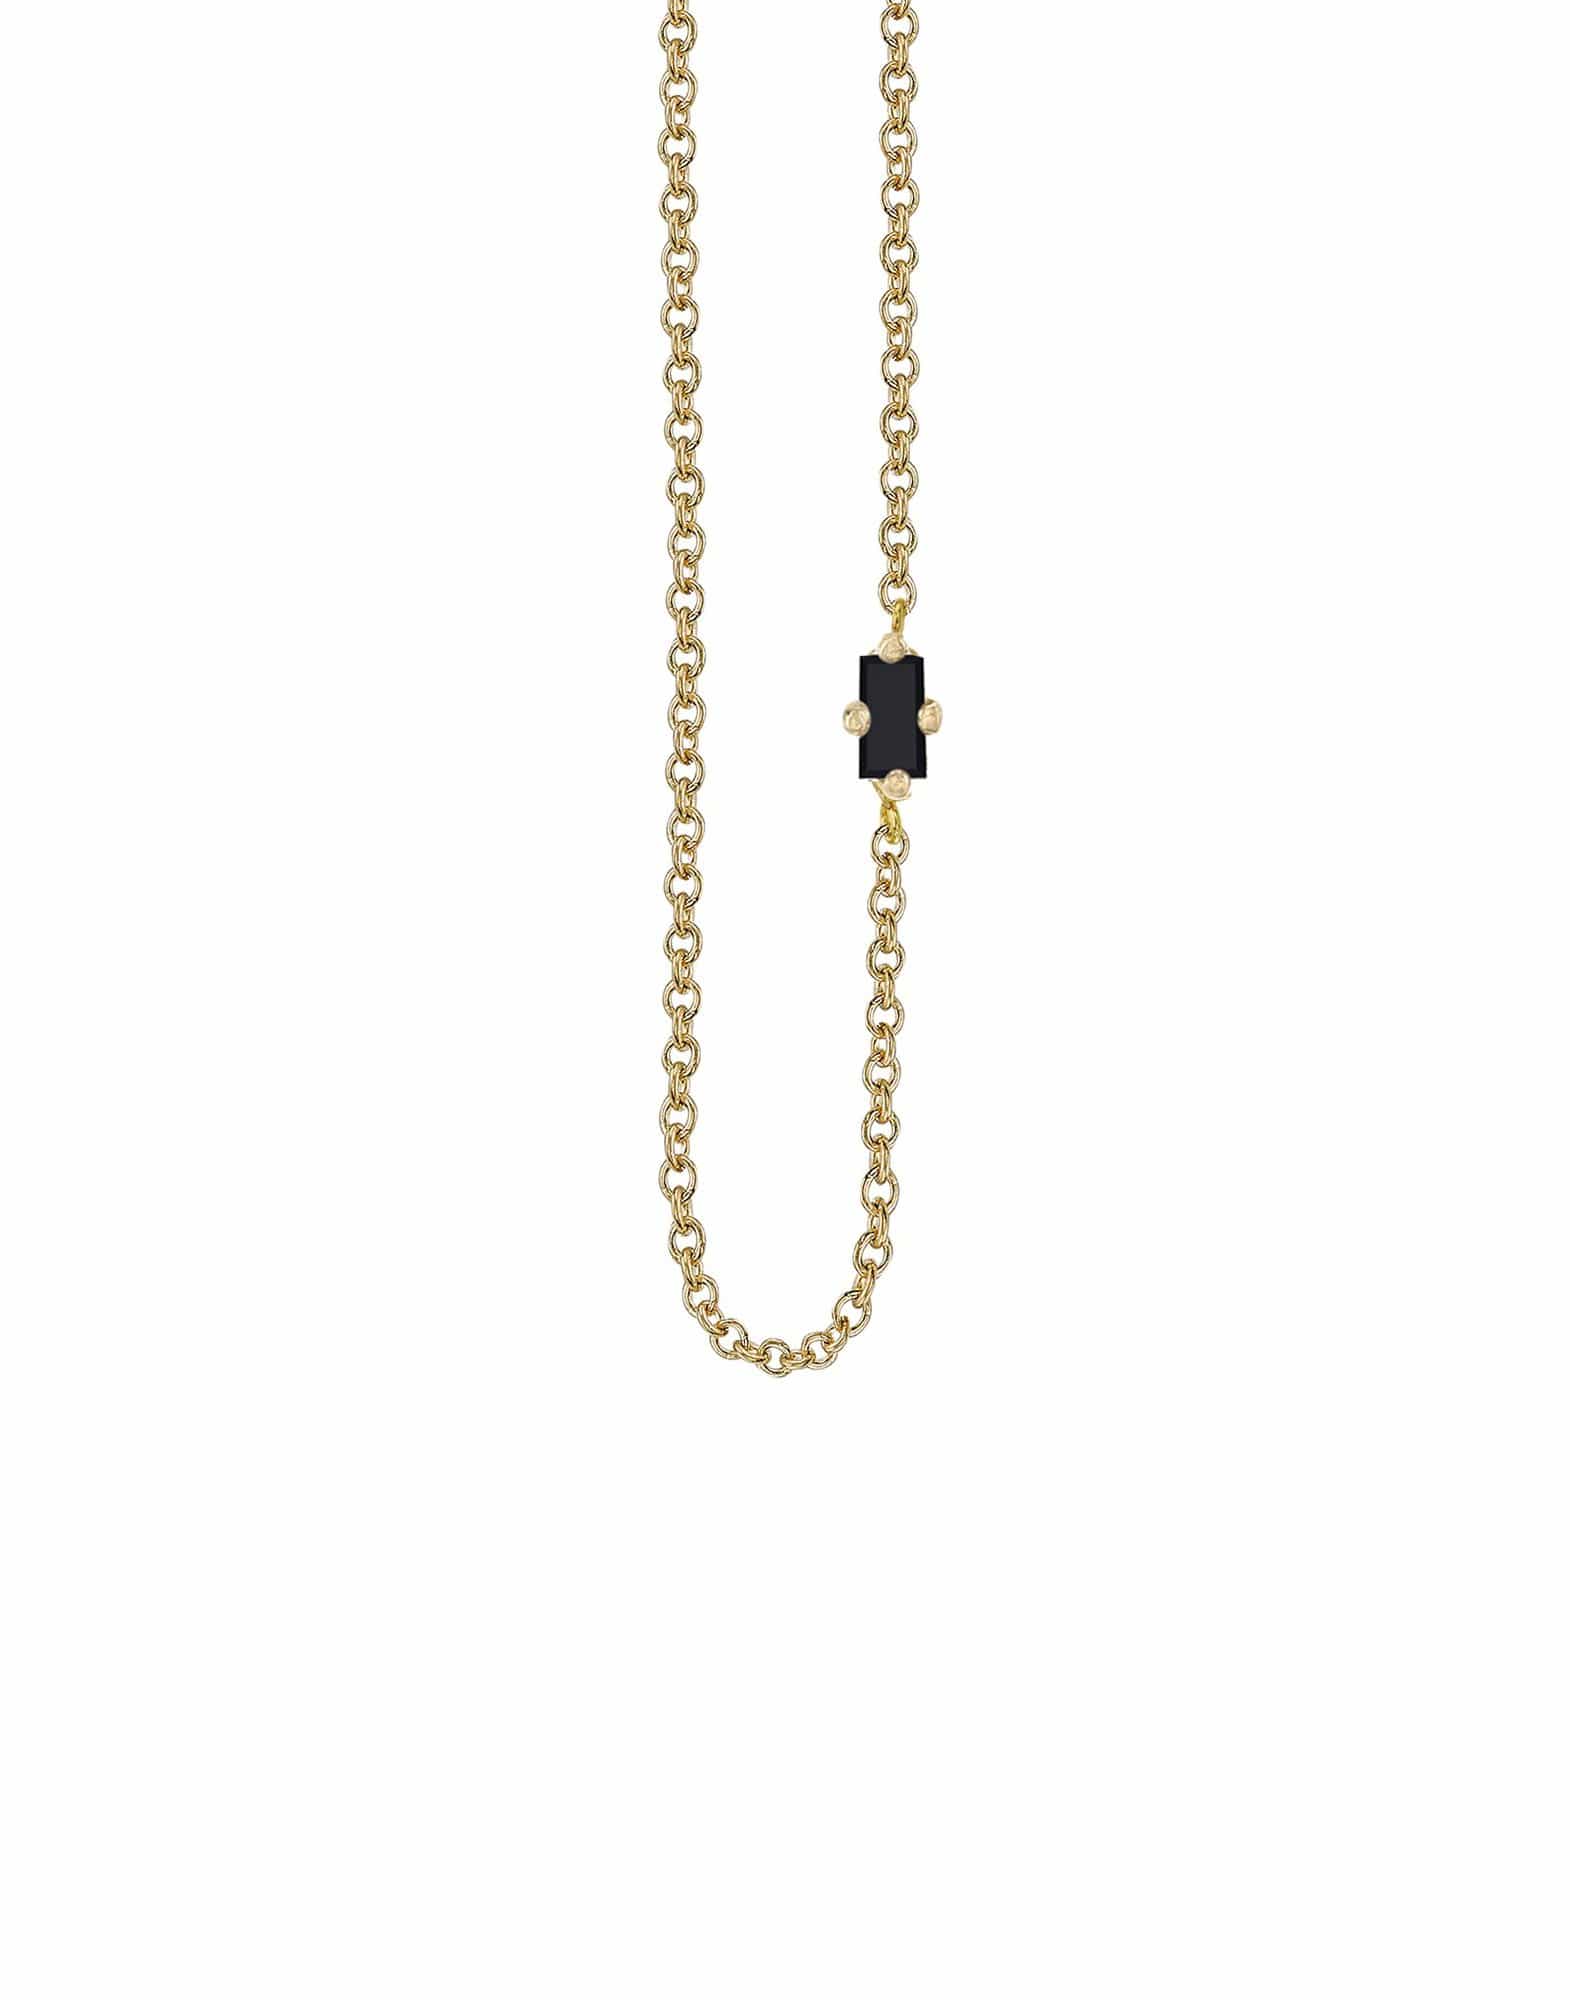 LIZZIE MANDLER-Floating Black Diamond Baguette Necklace-YELLOW GOLD